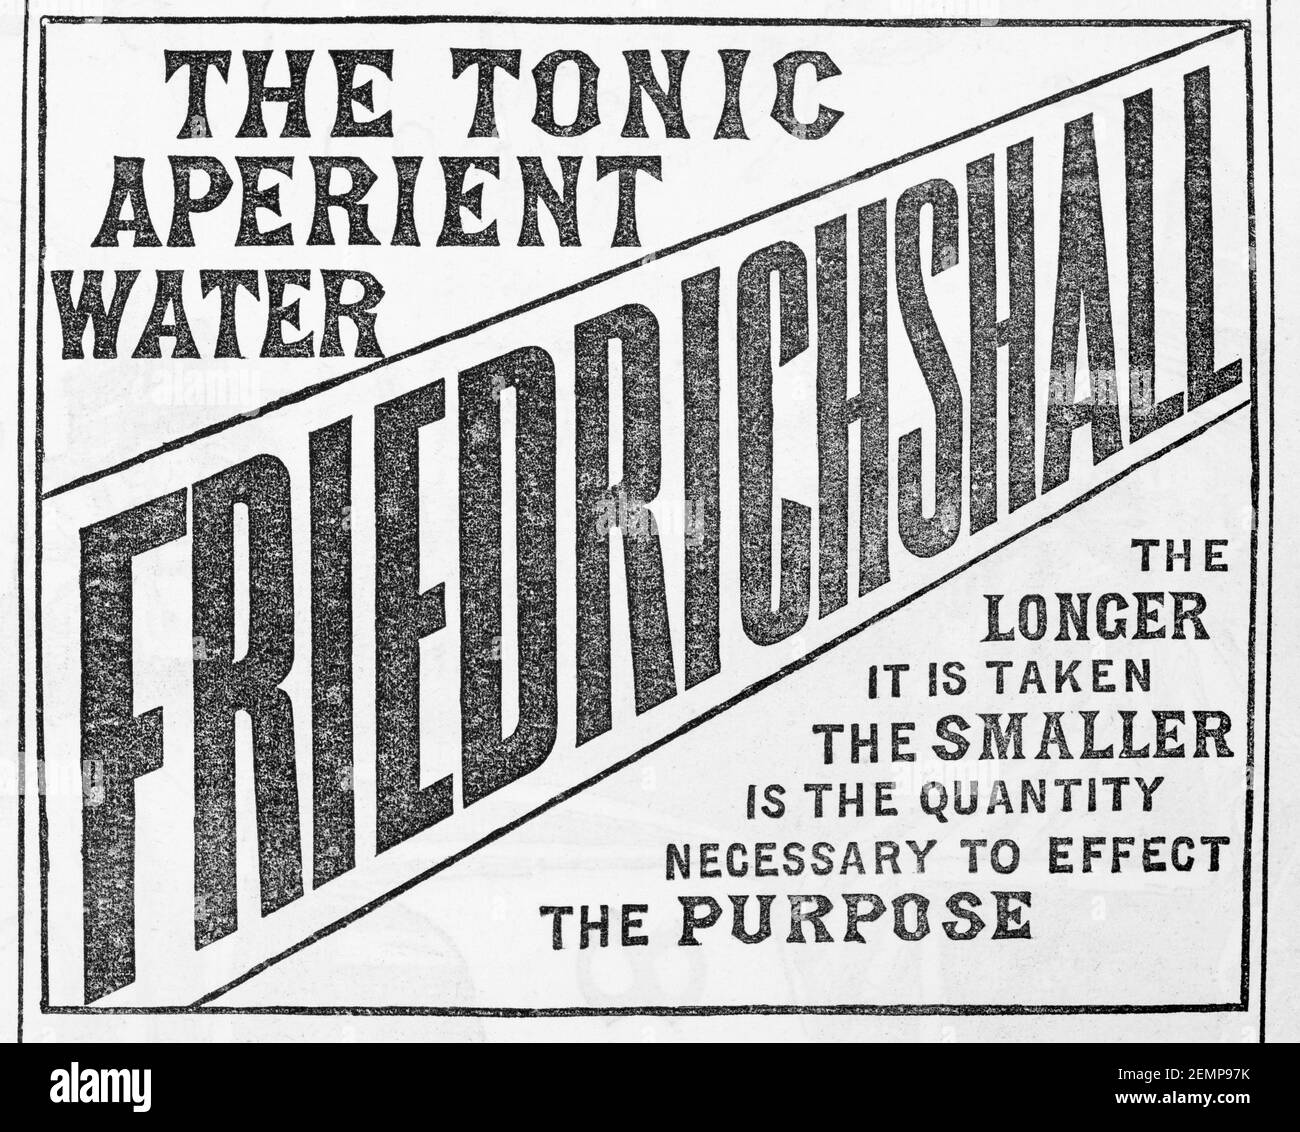 1887 Victorian advert promoting mineral water as as a health option. Insight into water quality & health issues in domestic households of old times Stock Photo